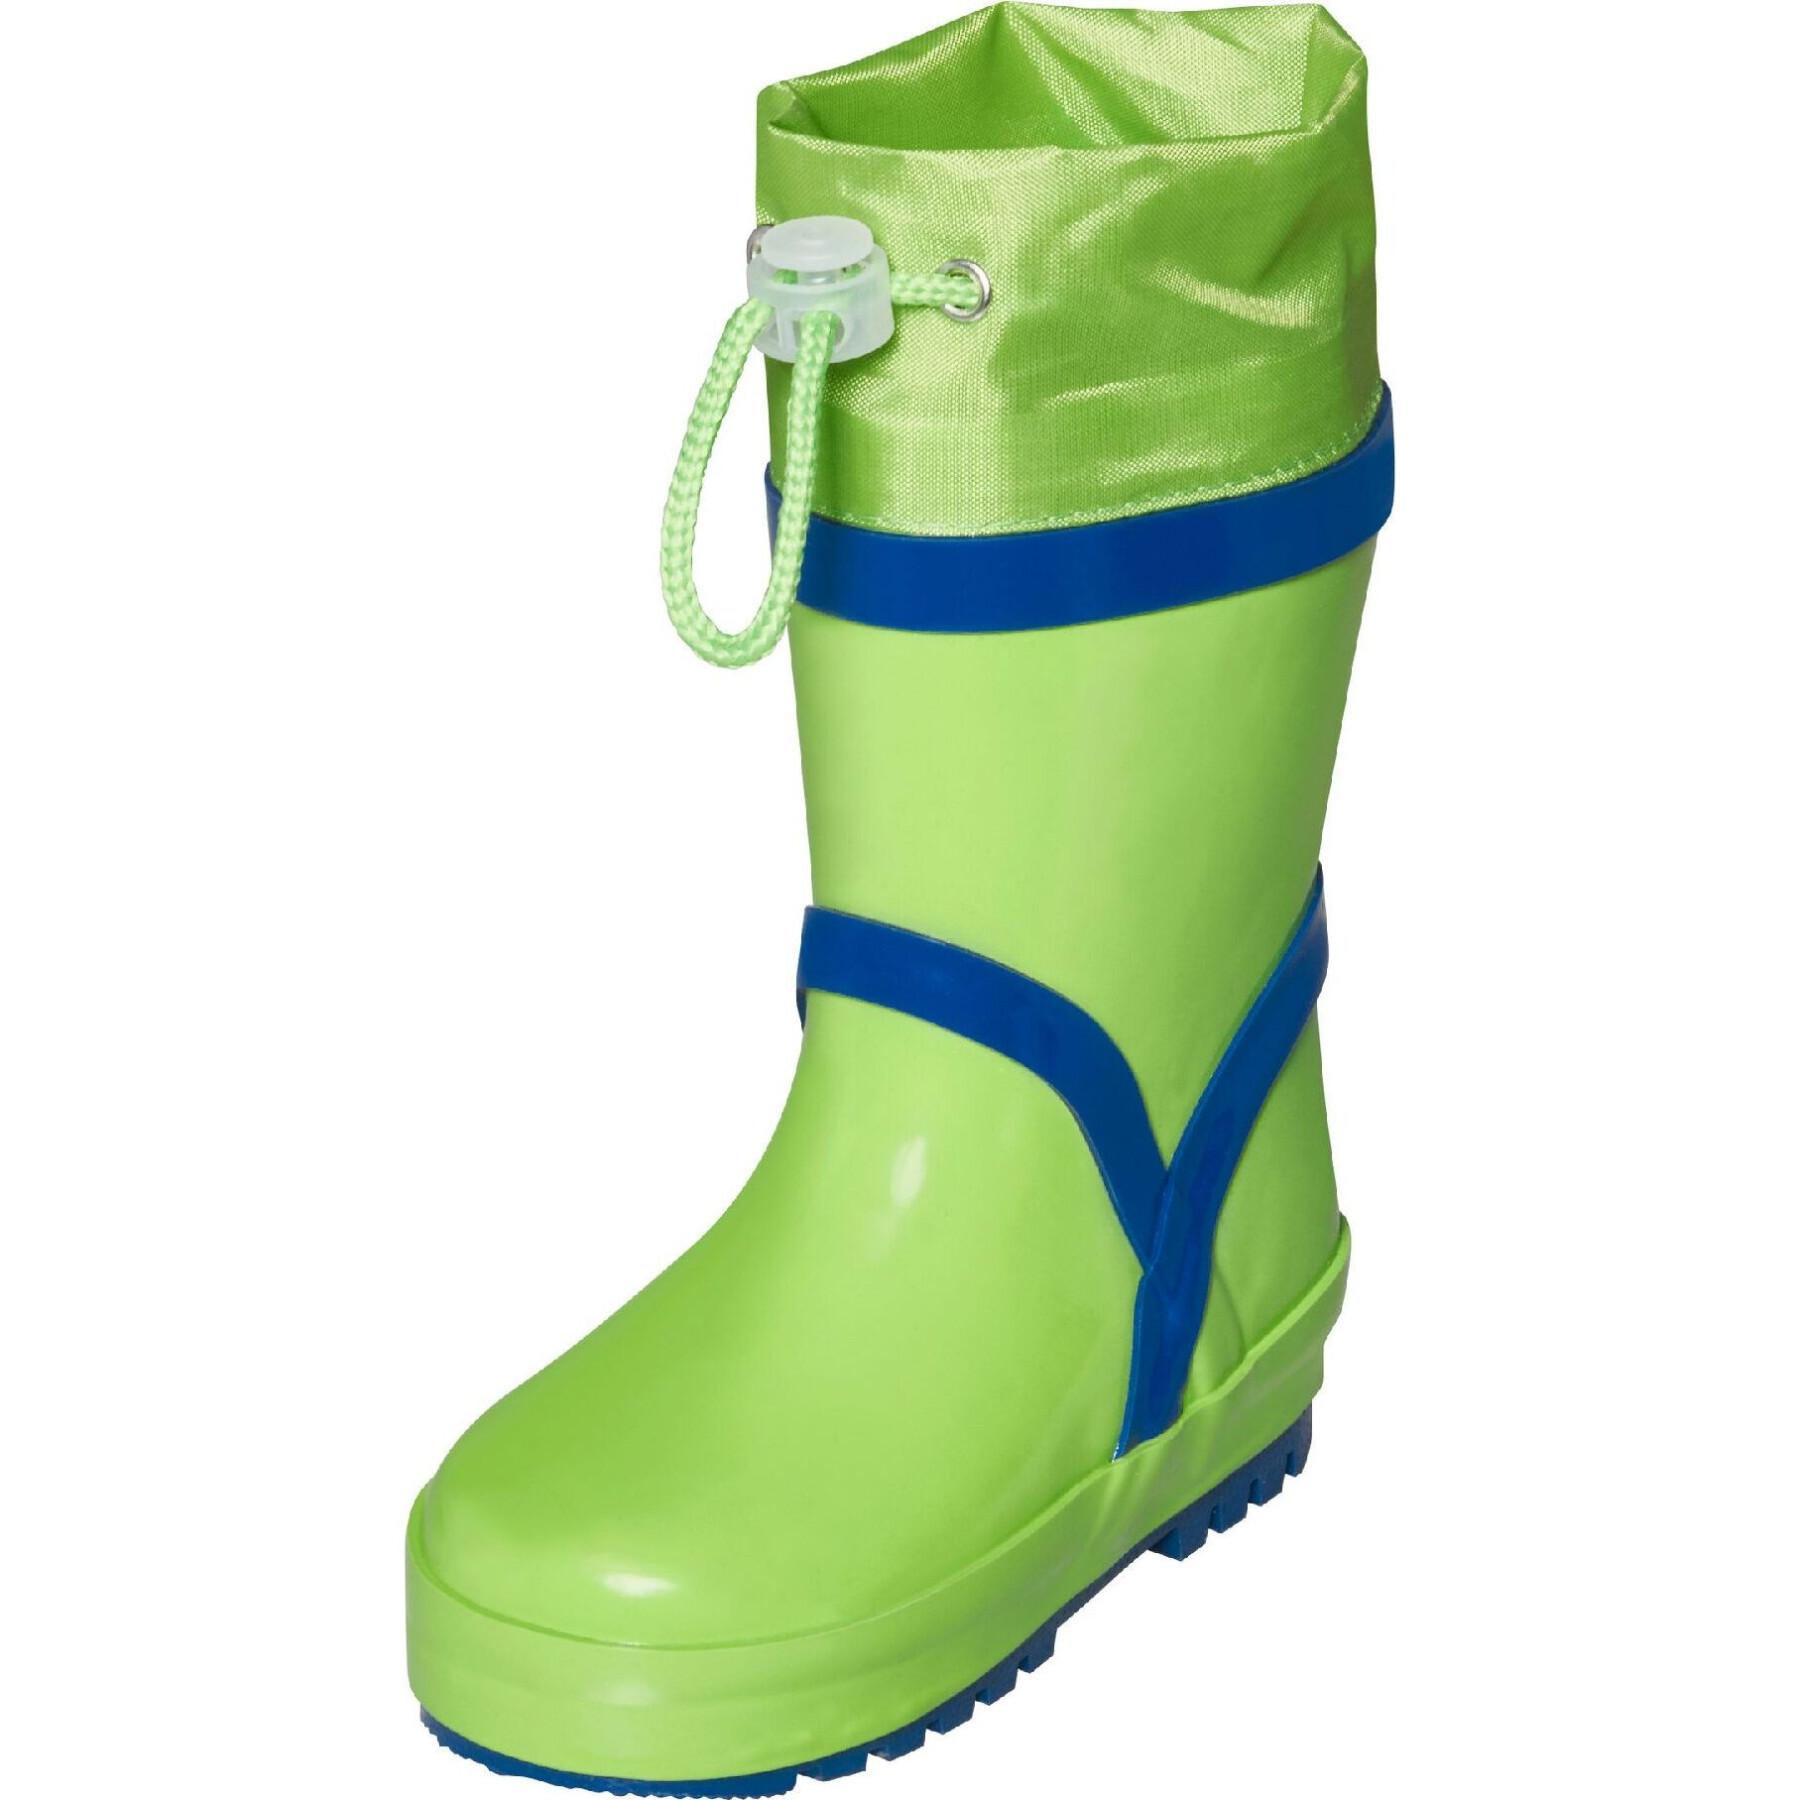 Baby rubber rain boots Playshoes Basic Lined